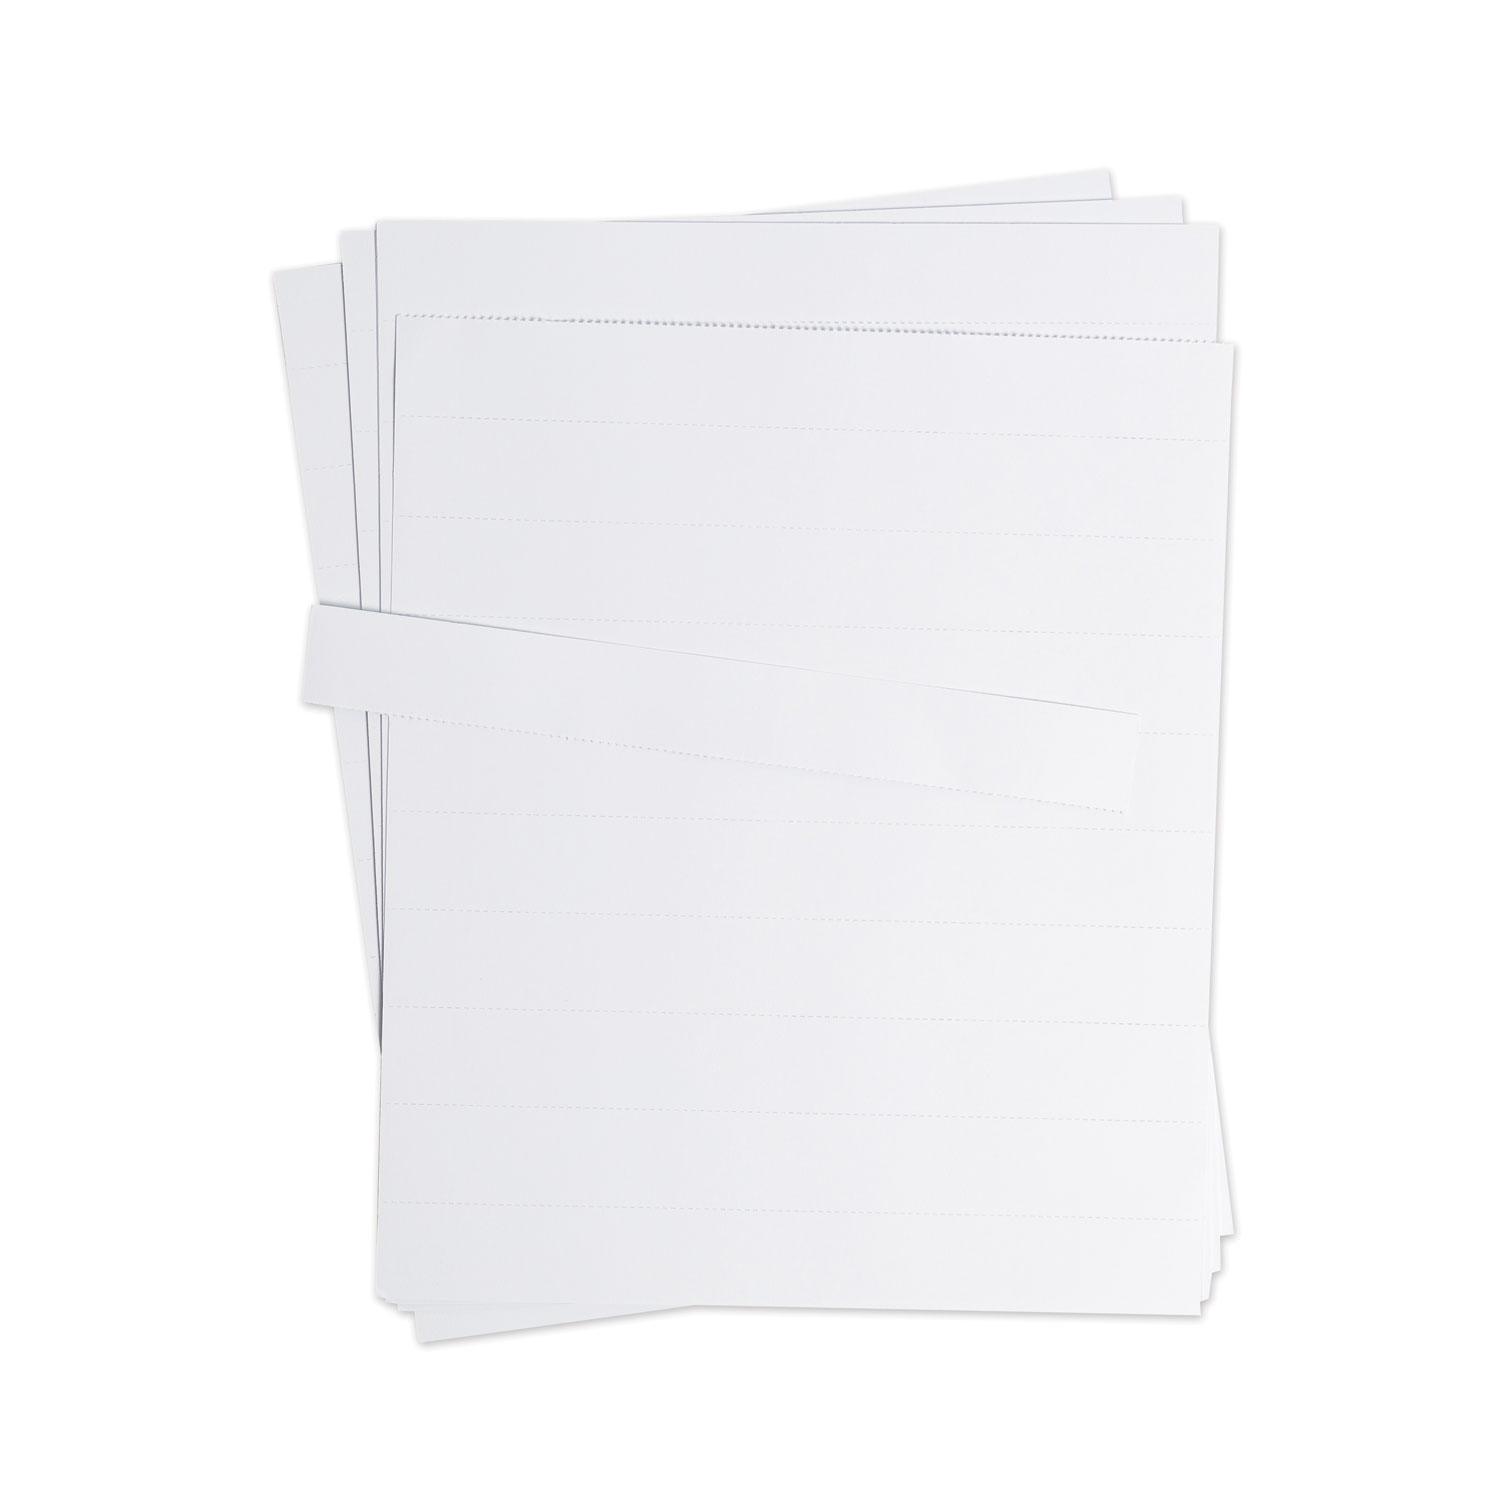 U Brands Data Card Replacement Sheet, 8.5 x 11 Sheets, White, 10/Pack